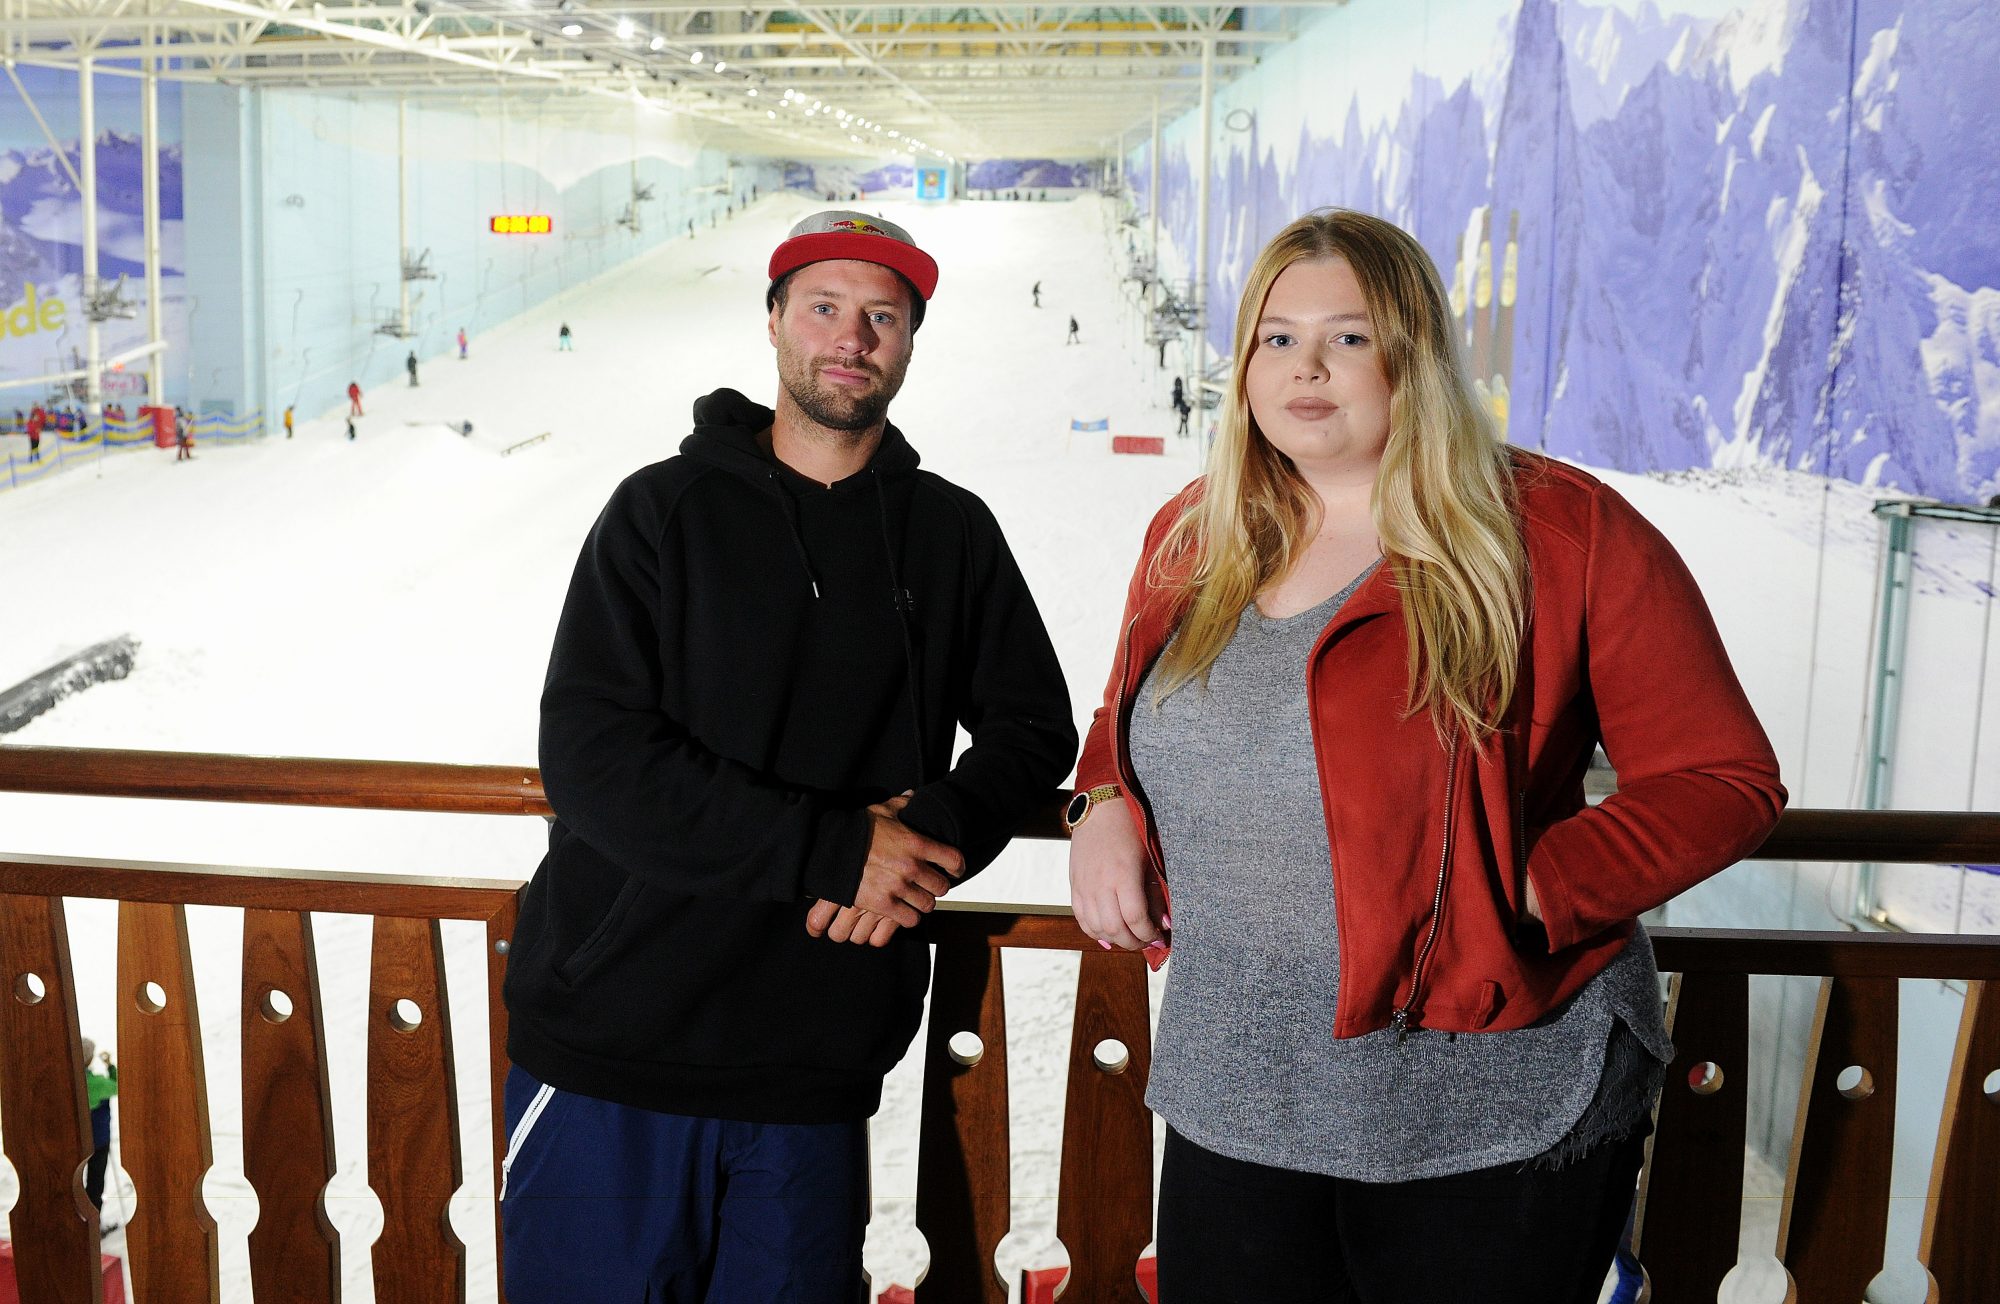 Billy Morgan Meets Promising Young Talent At Launch of Chill Factore Terrain Challenges